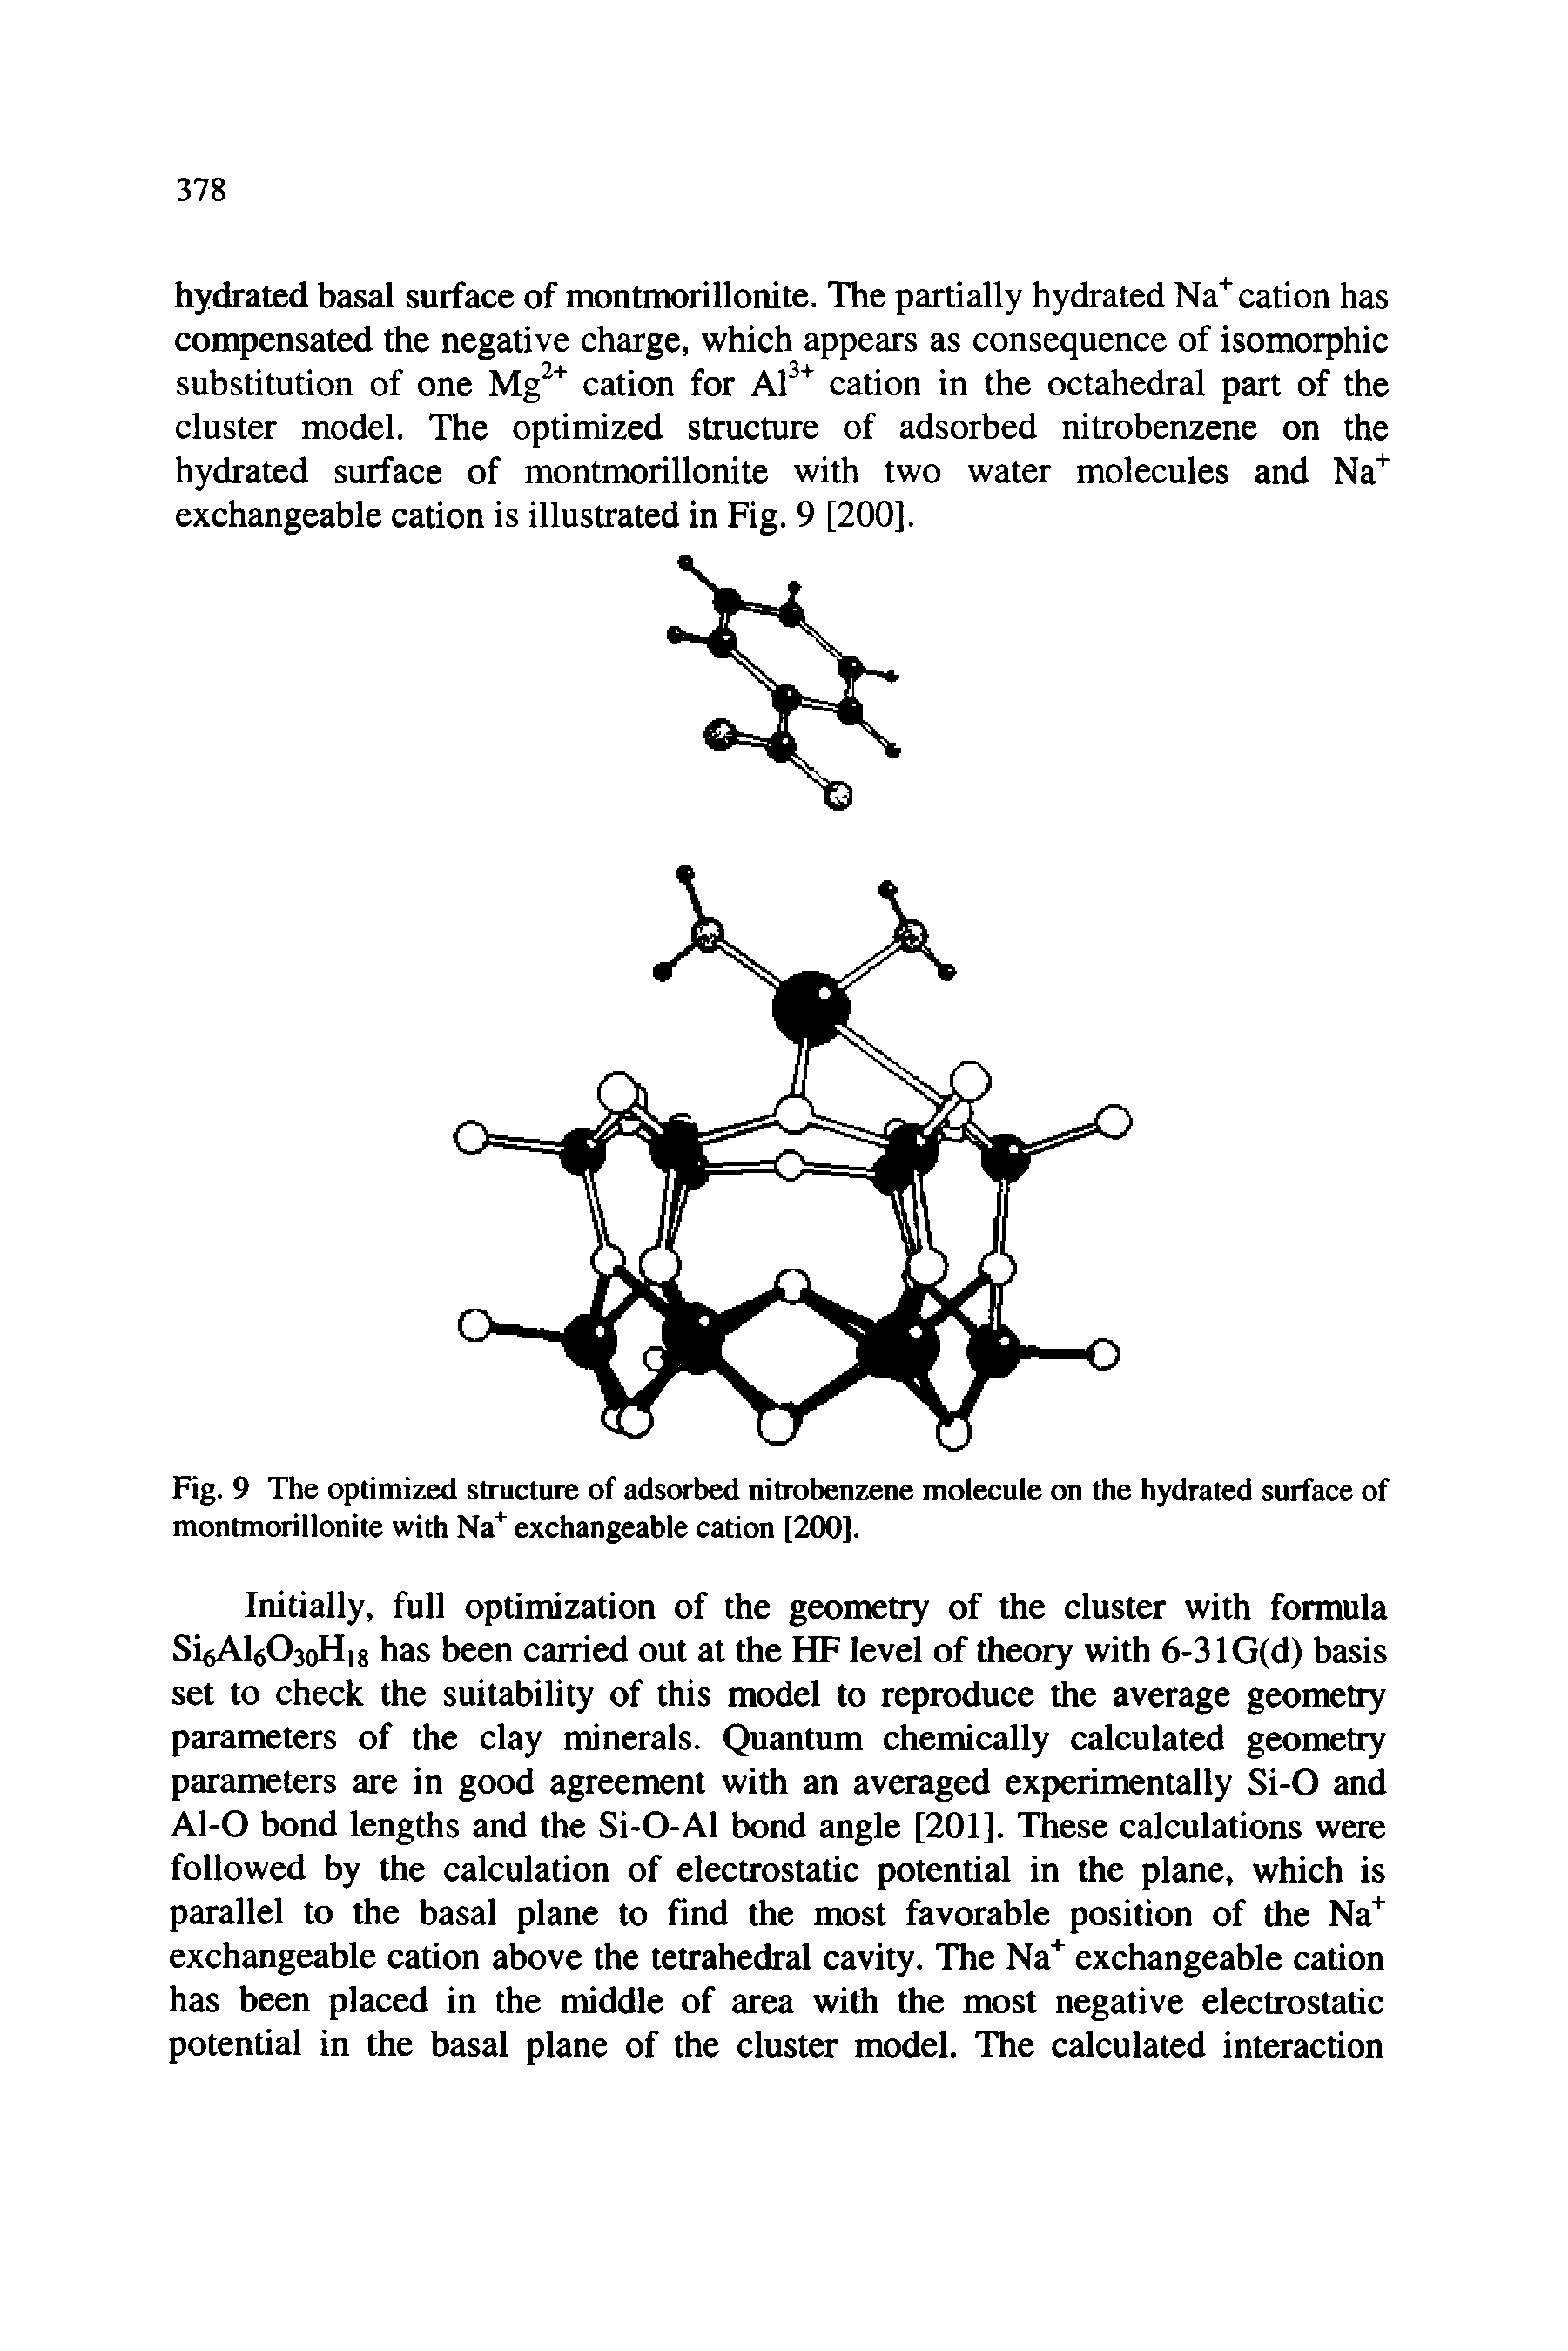 Fig. 9 The optimized structure of adsorbed nitrobenzene molecule on the hydrated surface of montmorillonite with Na+ exchangeable cation [200].